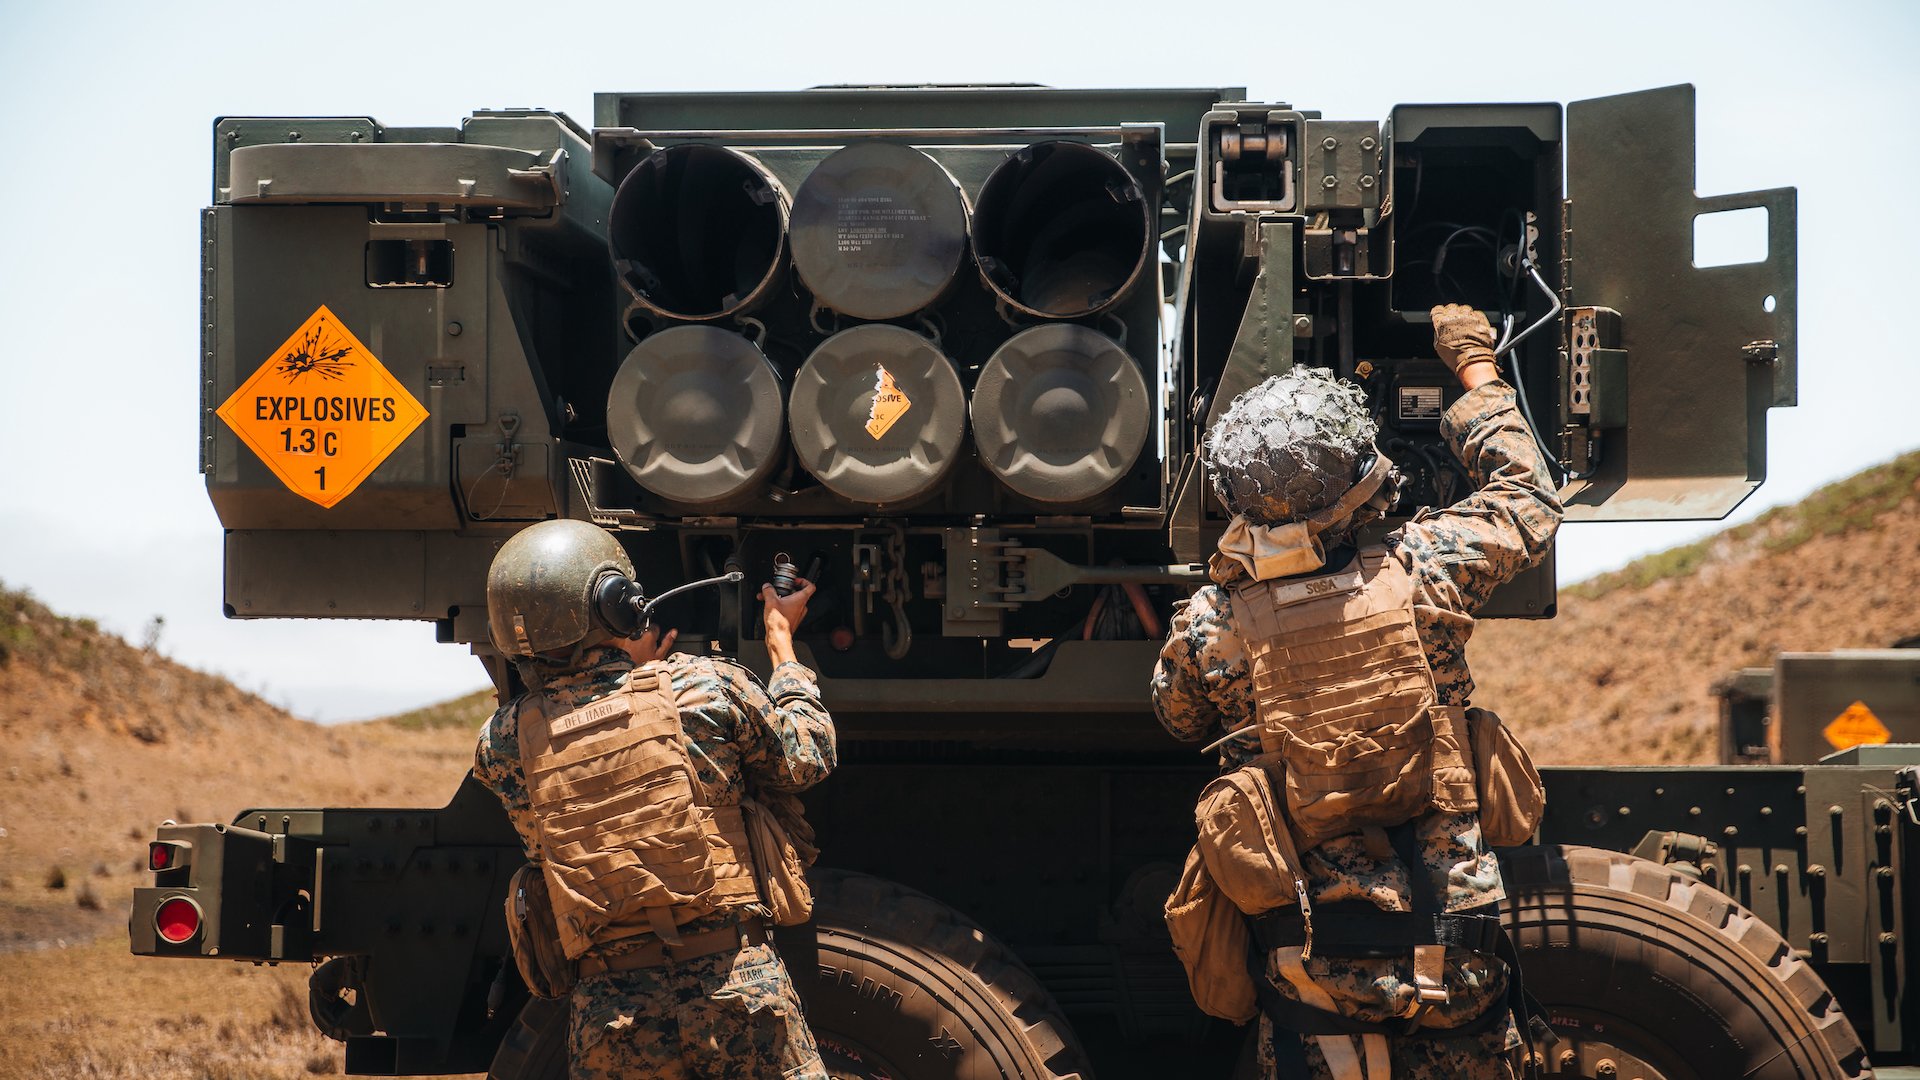 Russian media and military officials have been claiming to have destroyed US HIMARS systems — with no visual proof yet released — since their first arrival in Ukraine. Marine Corps photo by Cpl. Patrick King.